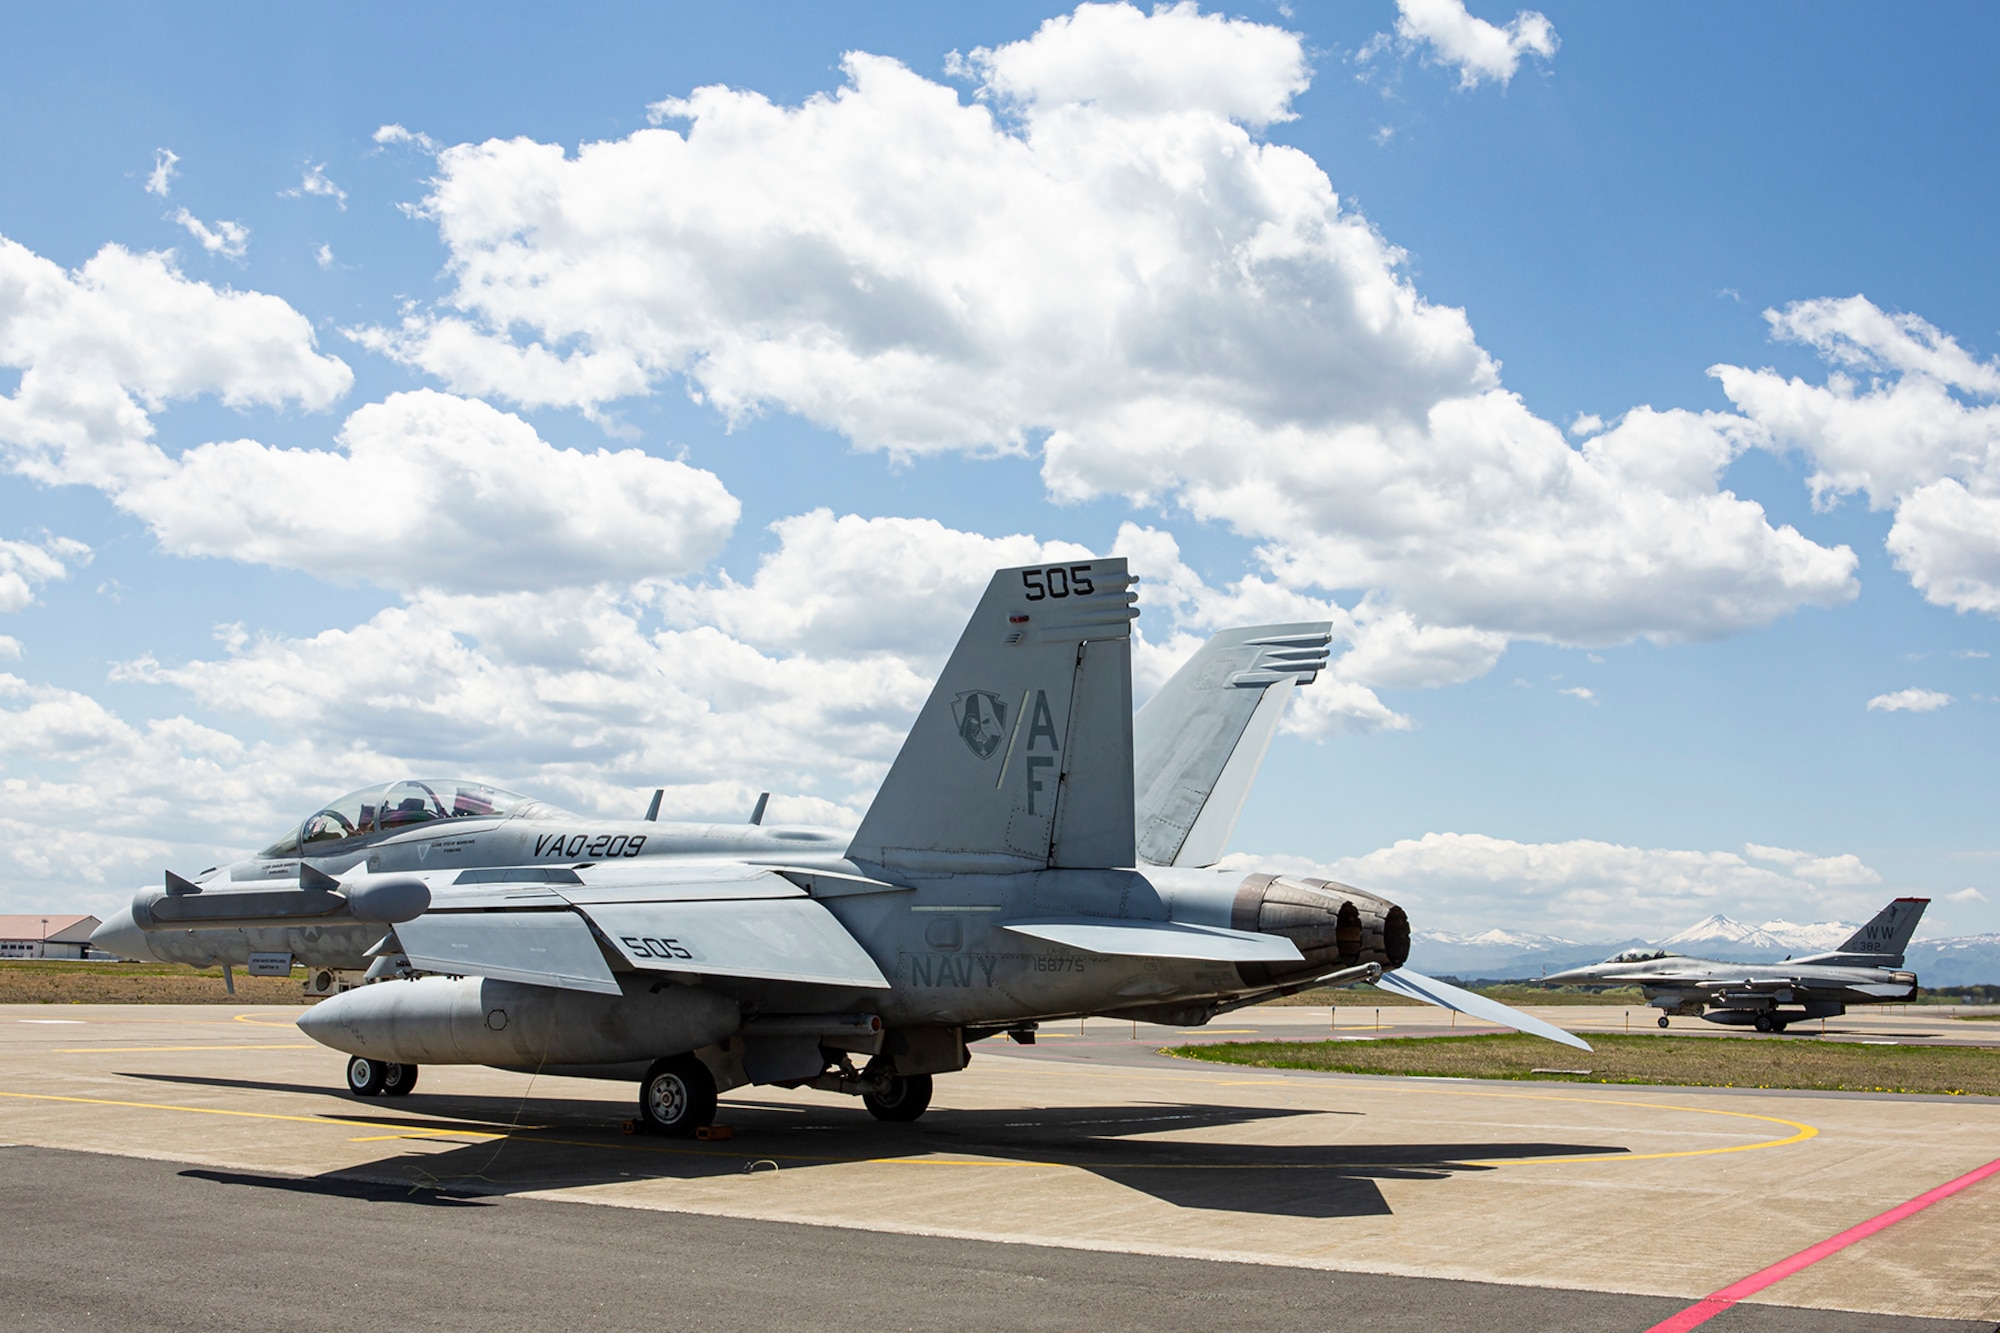 An EA-18G Growler from the Star Warriors of VAQ-209 sits ready to fly next to an F-16CM from the 13th Fighter Squadron at Misawa Air Base, Japan. VAQ-209 and the 13th & 14th Fighter Squadrons have recently been conducting suppression of enemy air defense training exercises to increase joint readiness and be ready to Fight Tonight! VAQ-209 is the US military's only reserve electronic attack squadron and is currently forward deployed to the INDOPACOM AOR in support of forward presence and stability operations. (U.S. Navy photo by Cmdr. Peter Scheu)